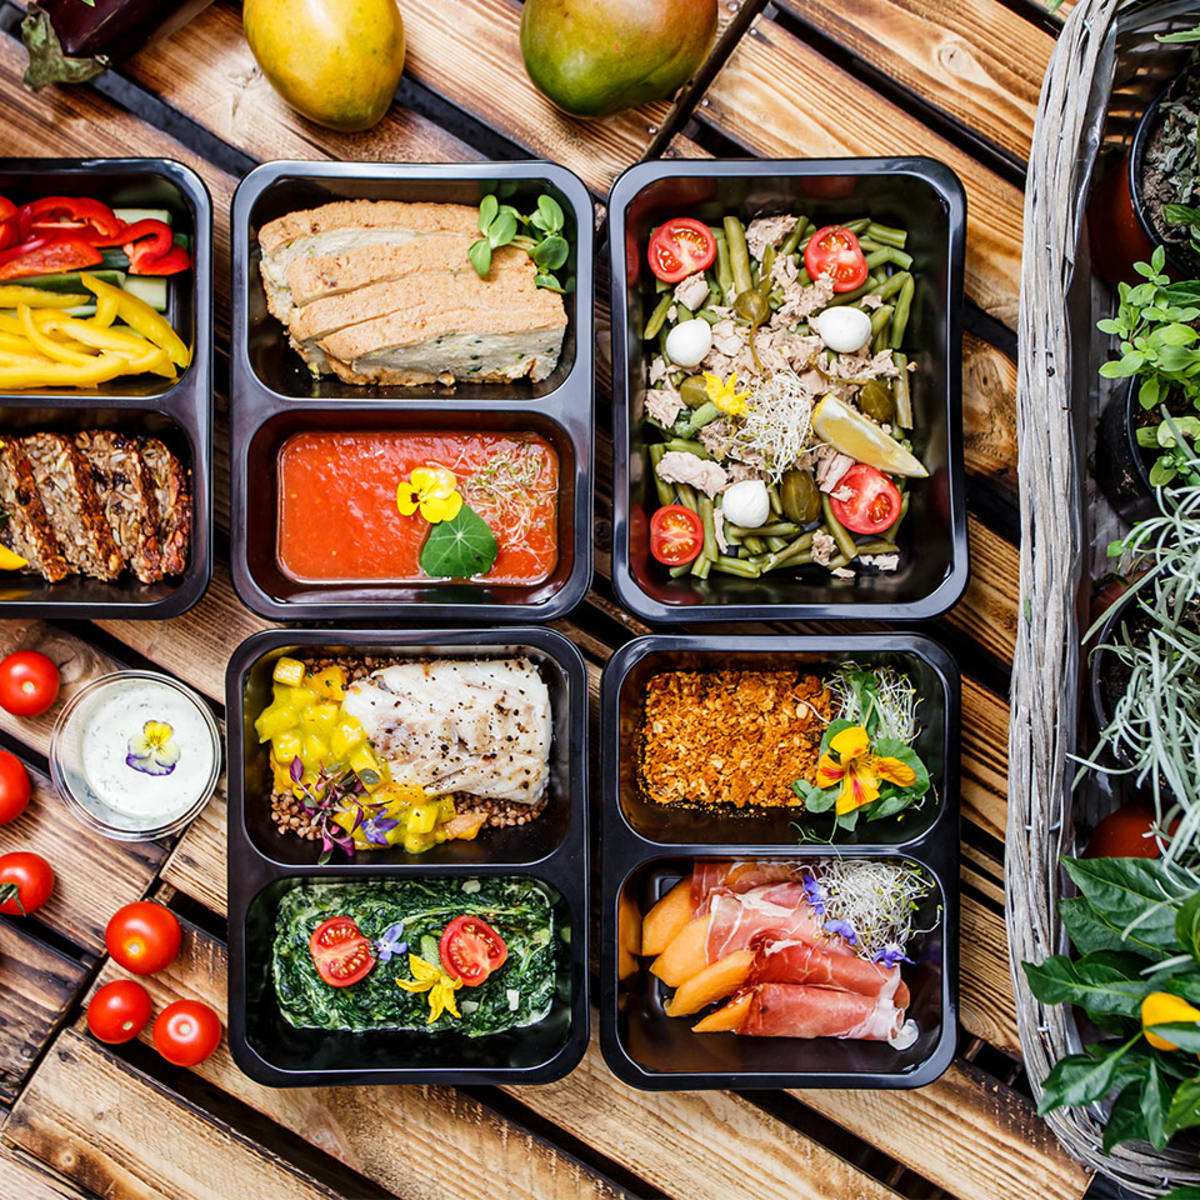 Master the Art of Meal Prepping